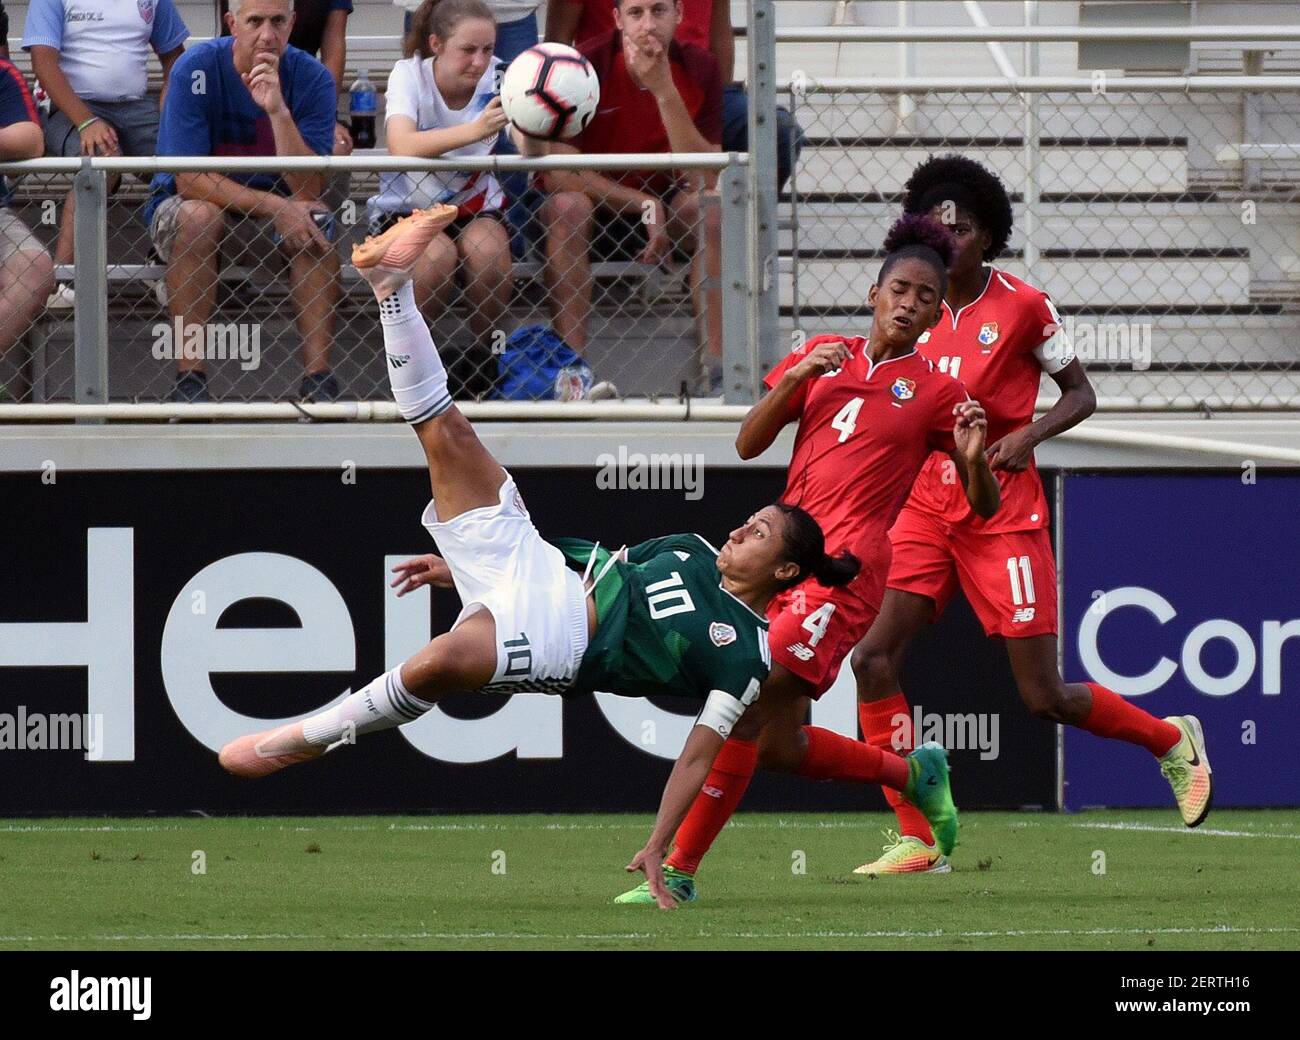 Oct 10, 2018; Cary, NC, USA; Mexico midfielder Stephany Mayor (10) volleys the ball in front of Panama midfielder Katherine Castillo (4) during the first half of a 2018 CONCACAF Women's Championship soccer match at Sahlen's Stadium. Mandatory Credit: Rob Kinnan-USA TODAY Sports/Sipa USA Stock Photo